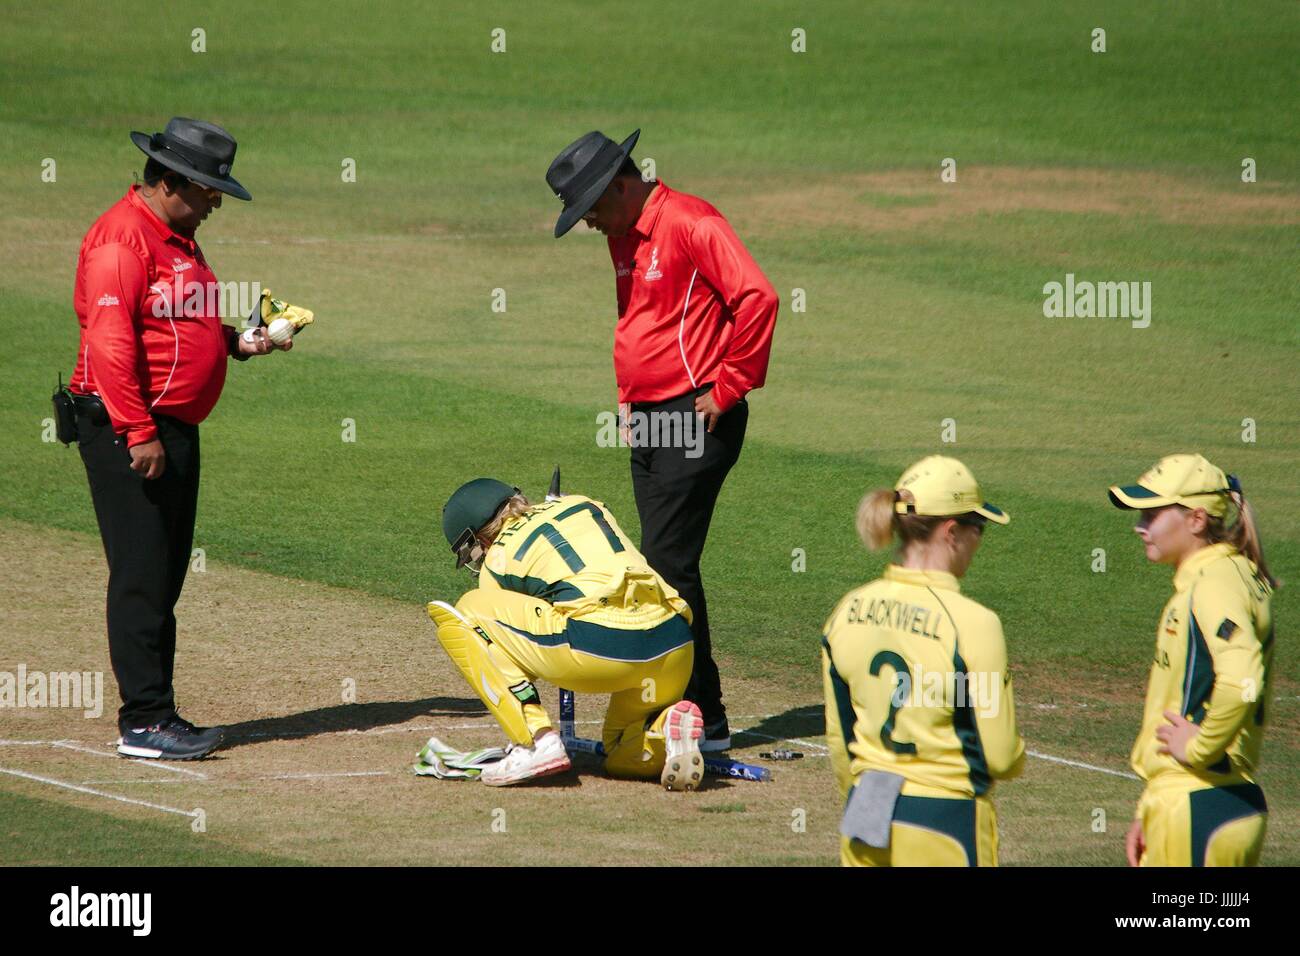 Derby, UK. 20th July, 2017. Umpires Shaun George and Ahsan Raza watch as Australia wicketkeeper Alyssa Healy attempts to repair the hole for the middle stumop during their match against India in the ICC Women's World Cup semi final at the County Ground Derby. Credit: Colin Edwards/Alamy Live News Stock Photo